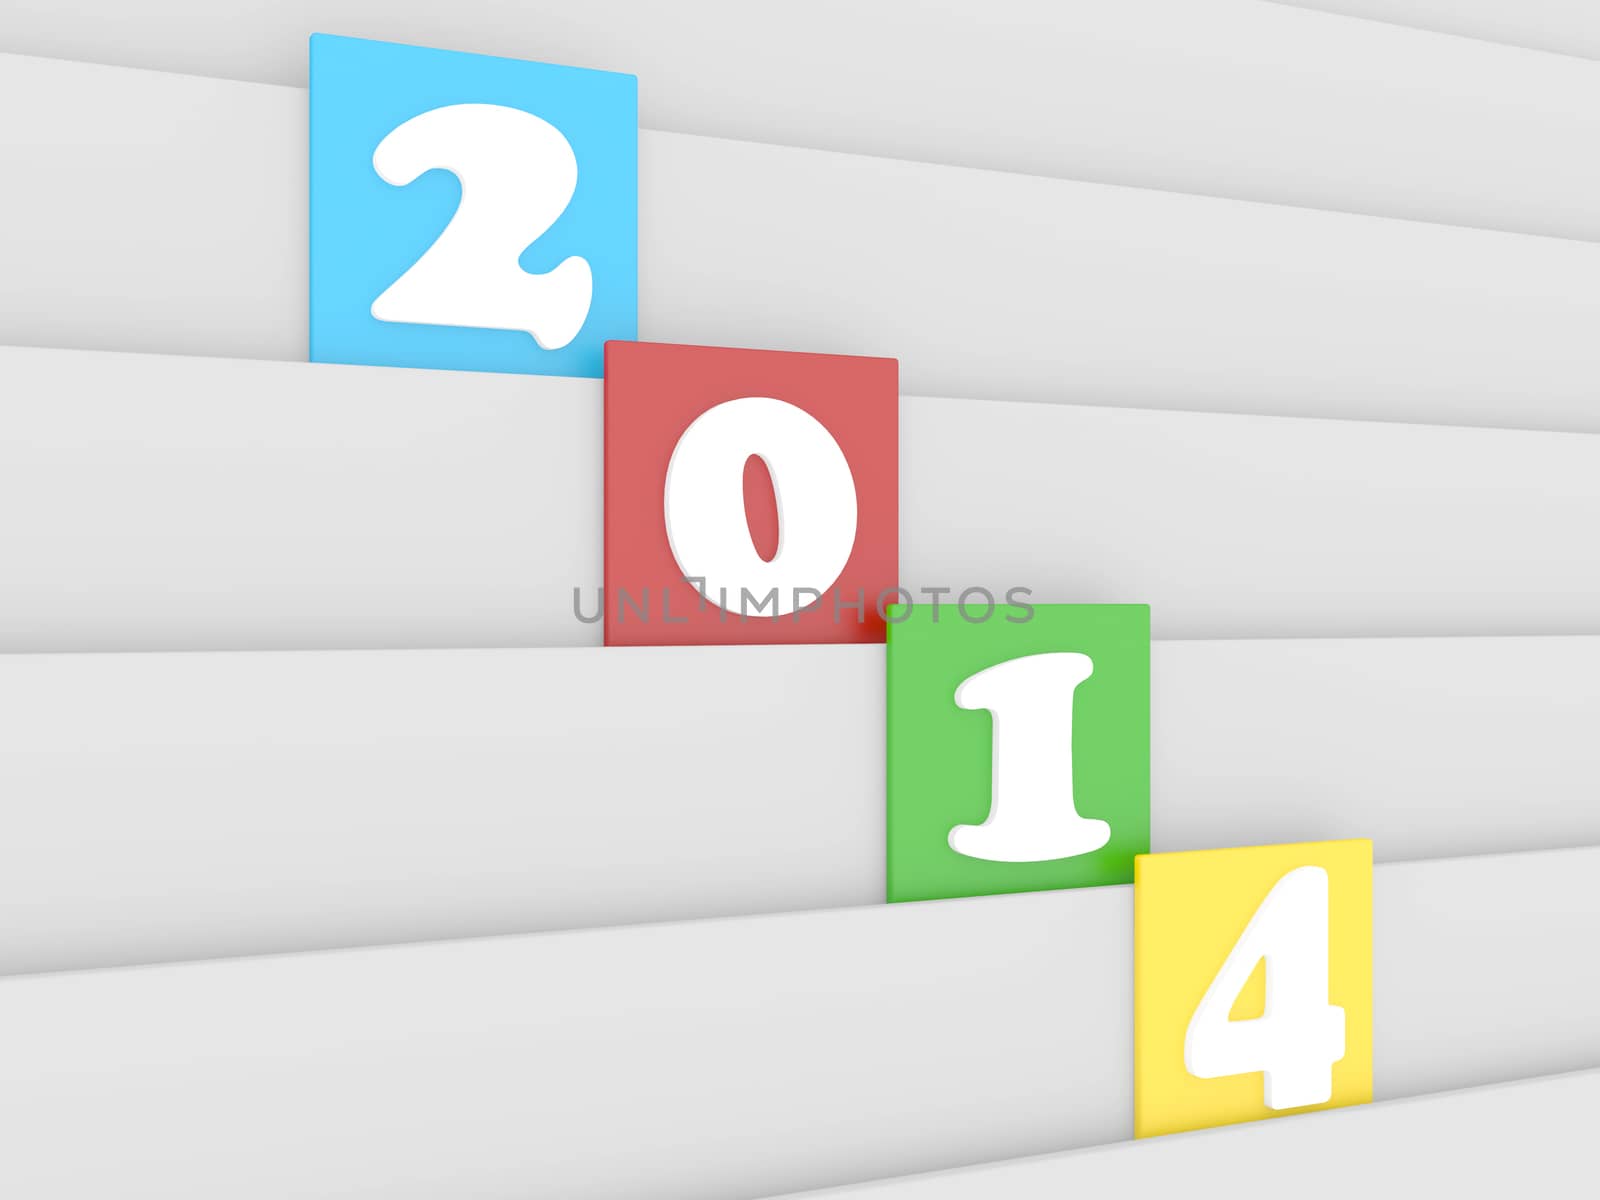 3d new year 2014 date on small colorful block